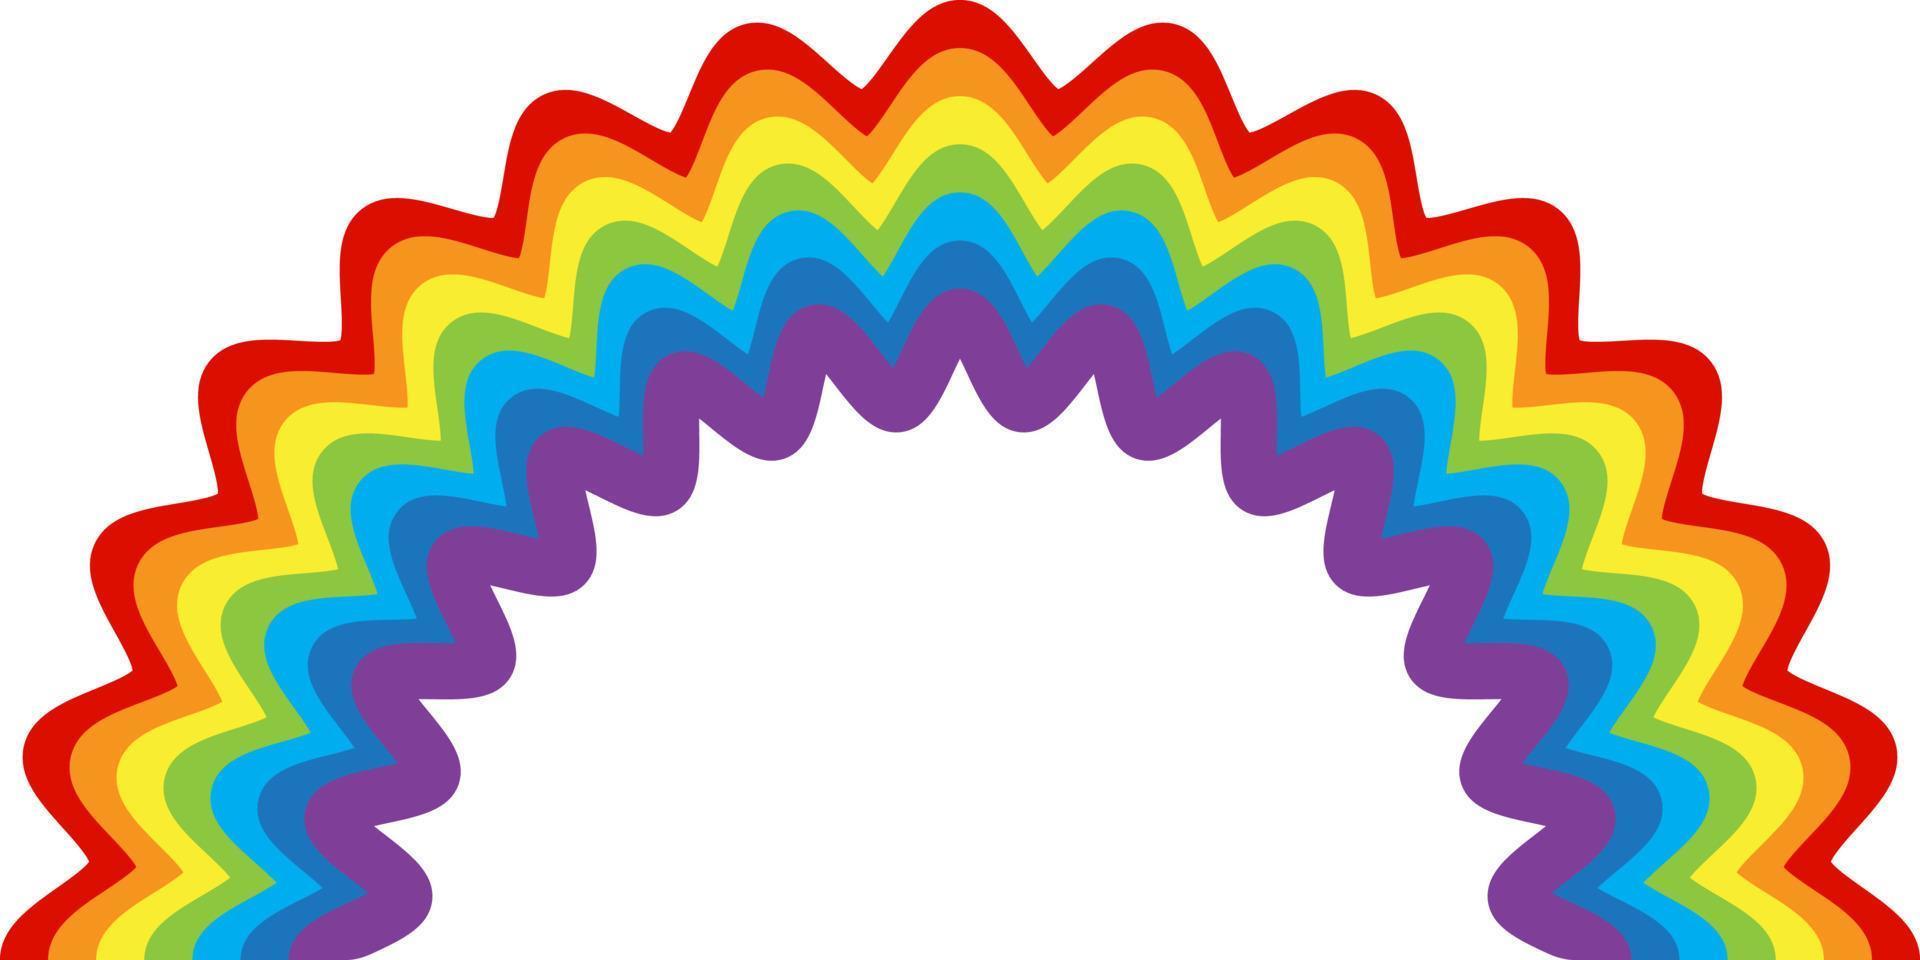 rainbow multicolored curved. Vector Illustration. EPS10